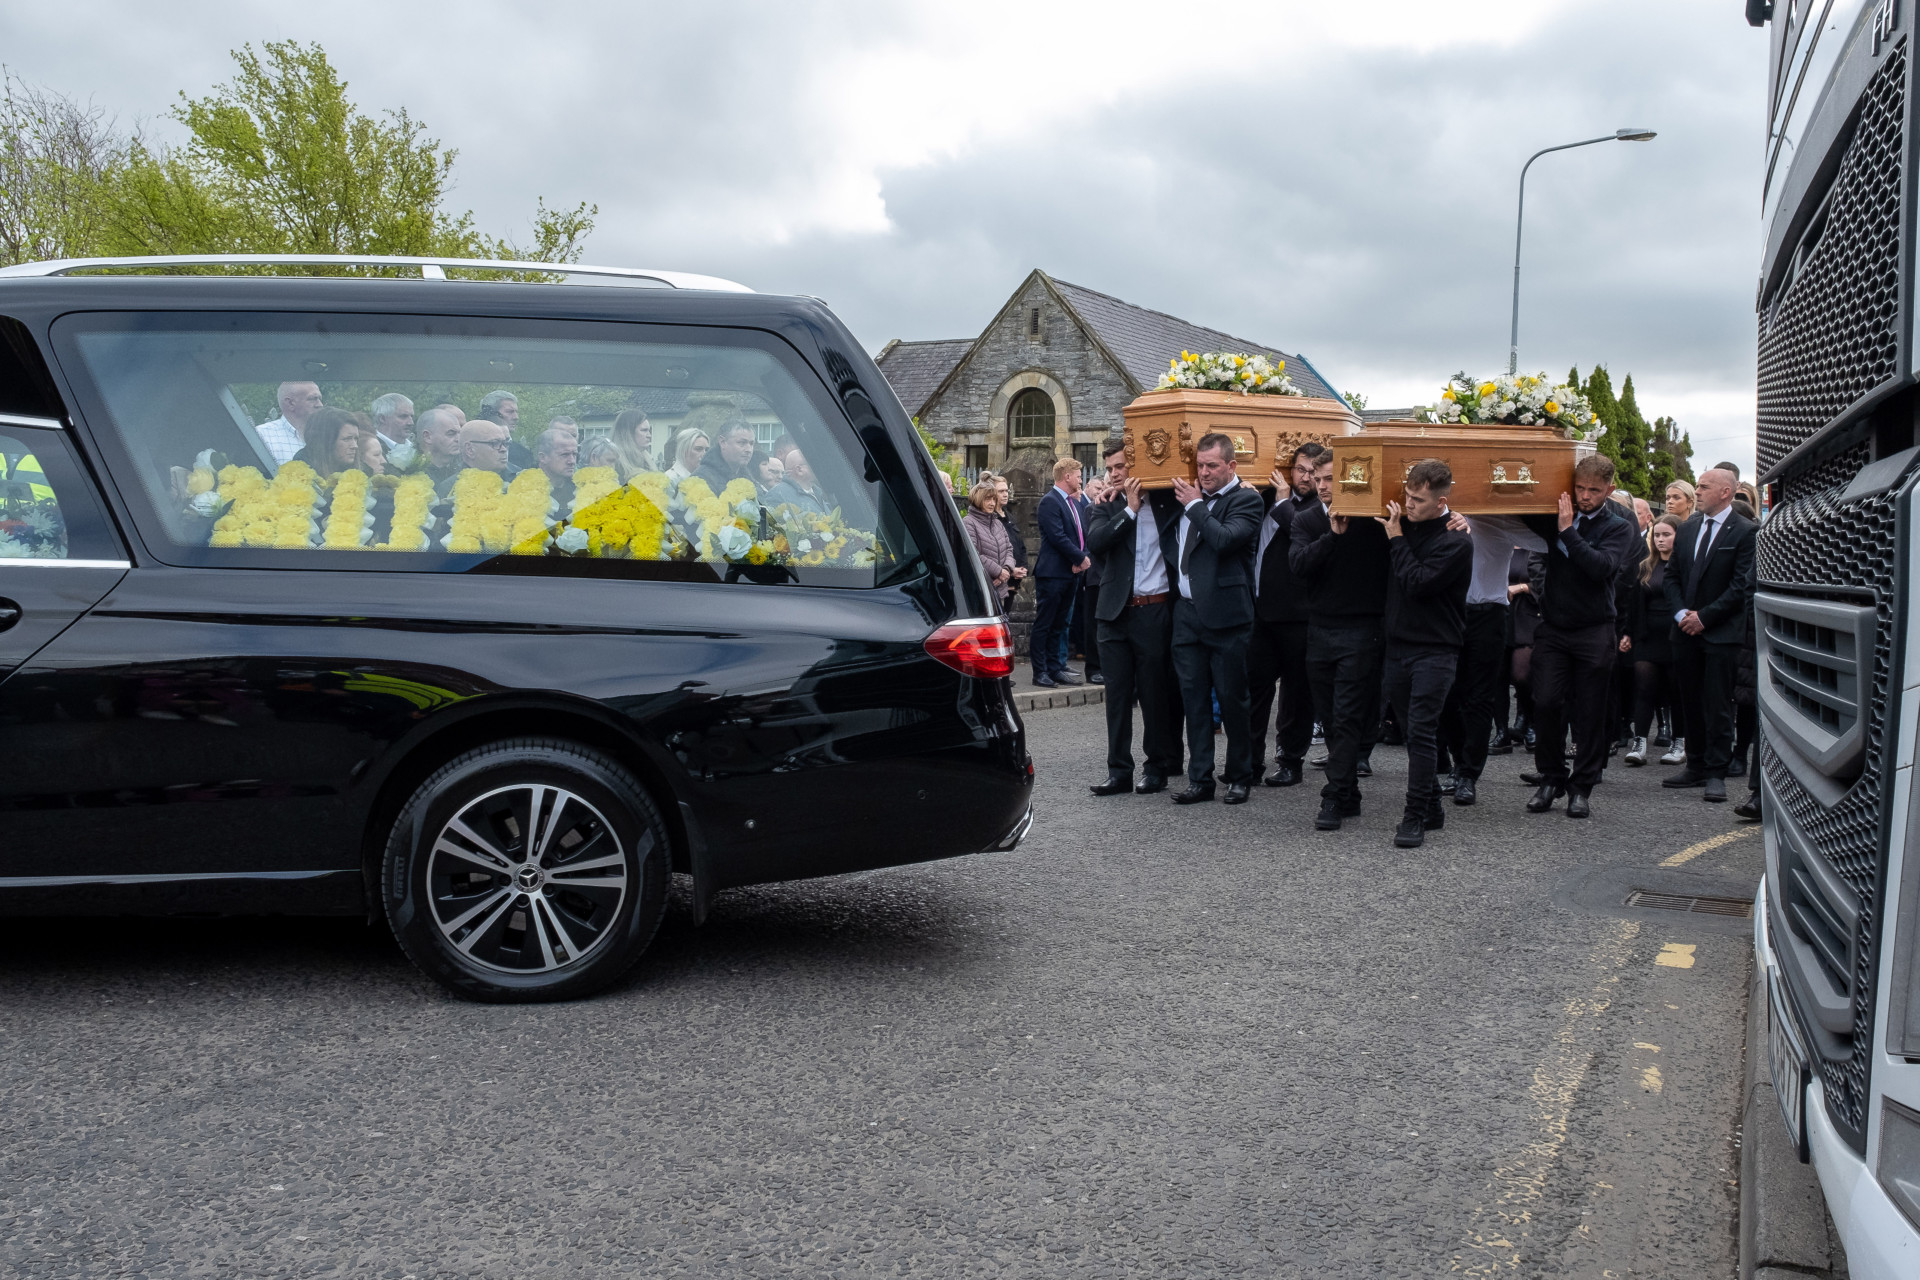 Children’s poignant tribute to parents at double funeral